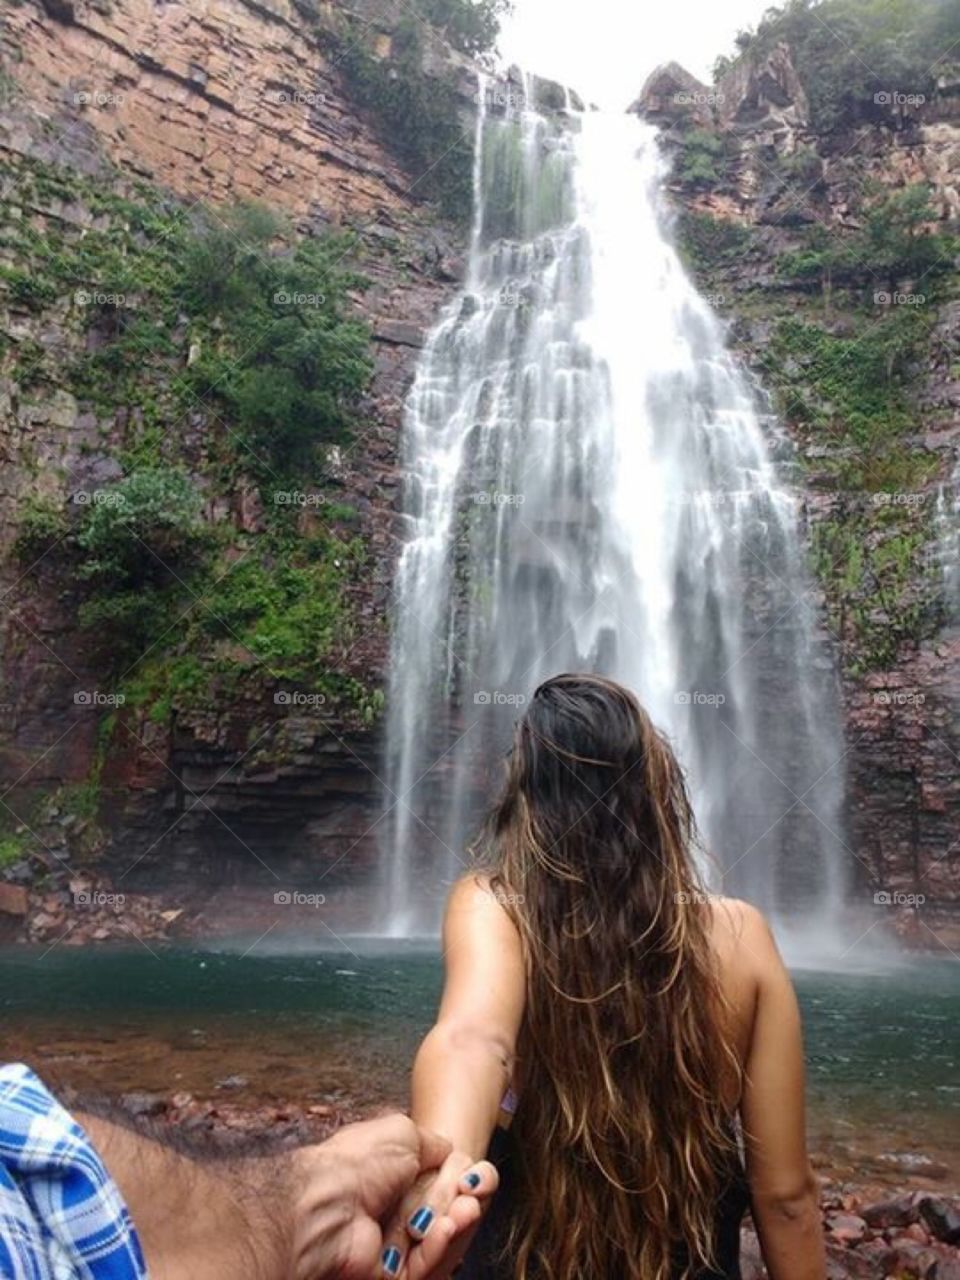 Let's go to Vila Bela!
Fantastic tour with camping in Sitio Recanto 7 Falls, waterfalls, canyons and natural pools- Brazil